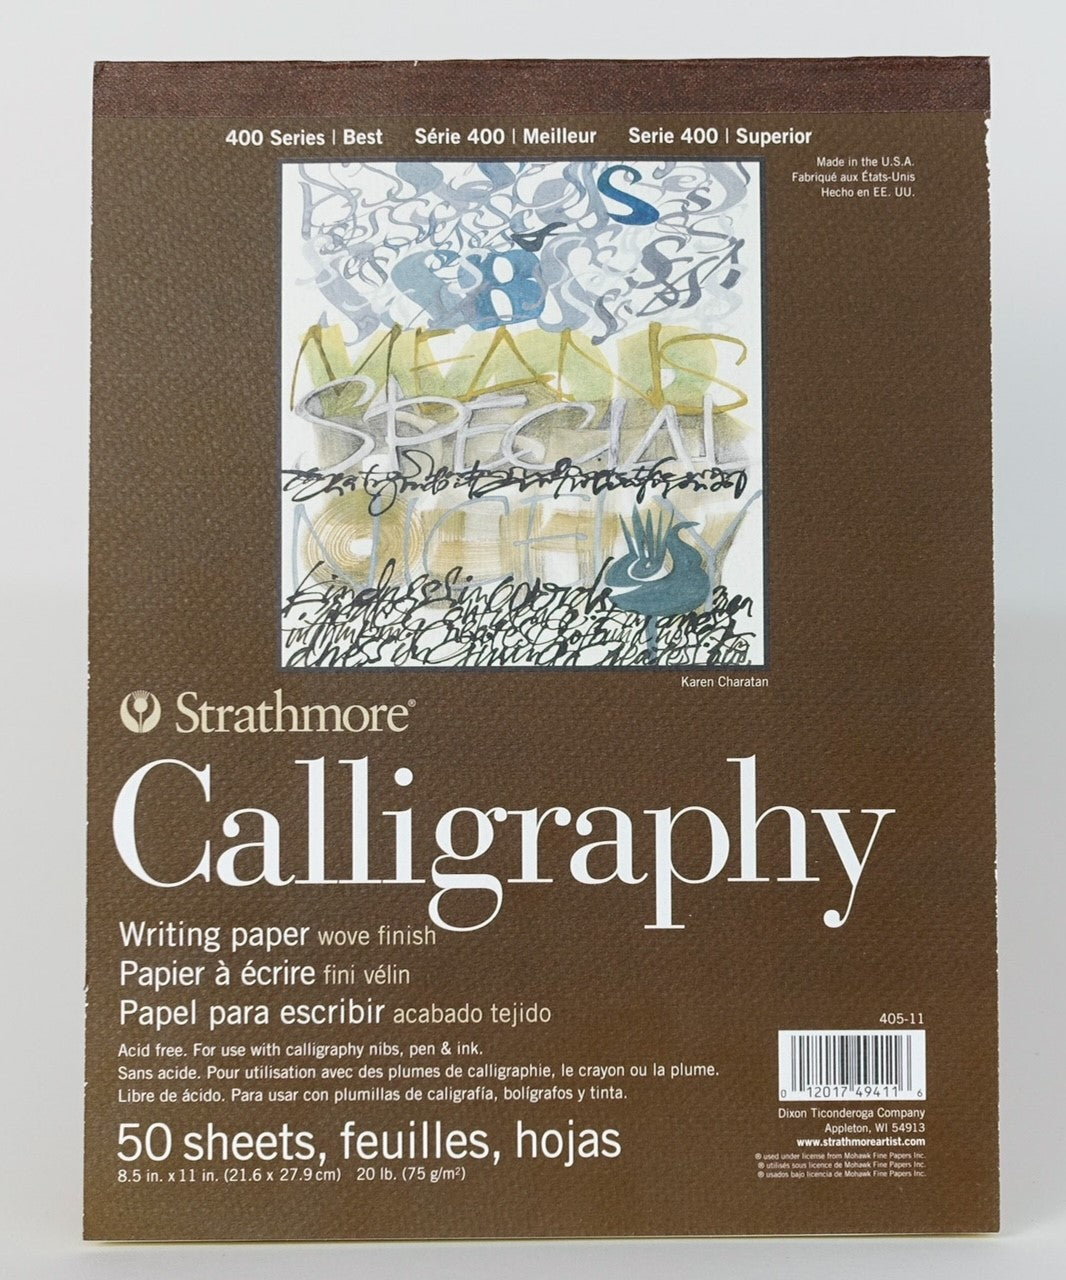 Strathmore 400 Series Calligraphy Writing Paper 8.5"x11" (50 sheet pad) - Wove Finish